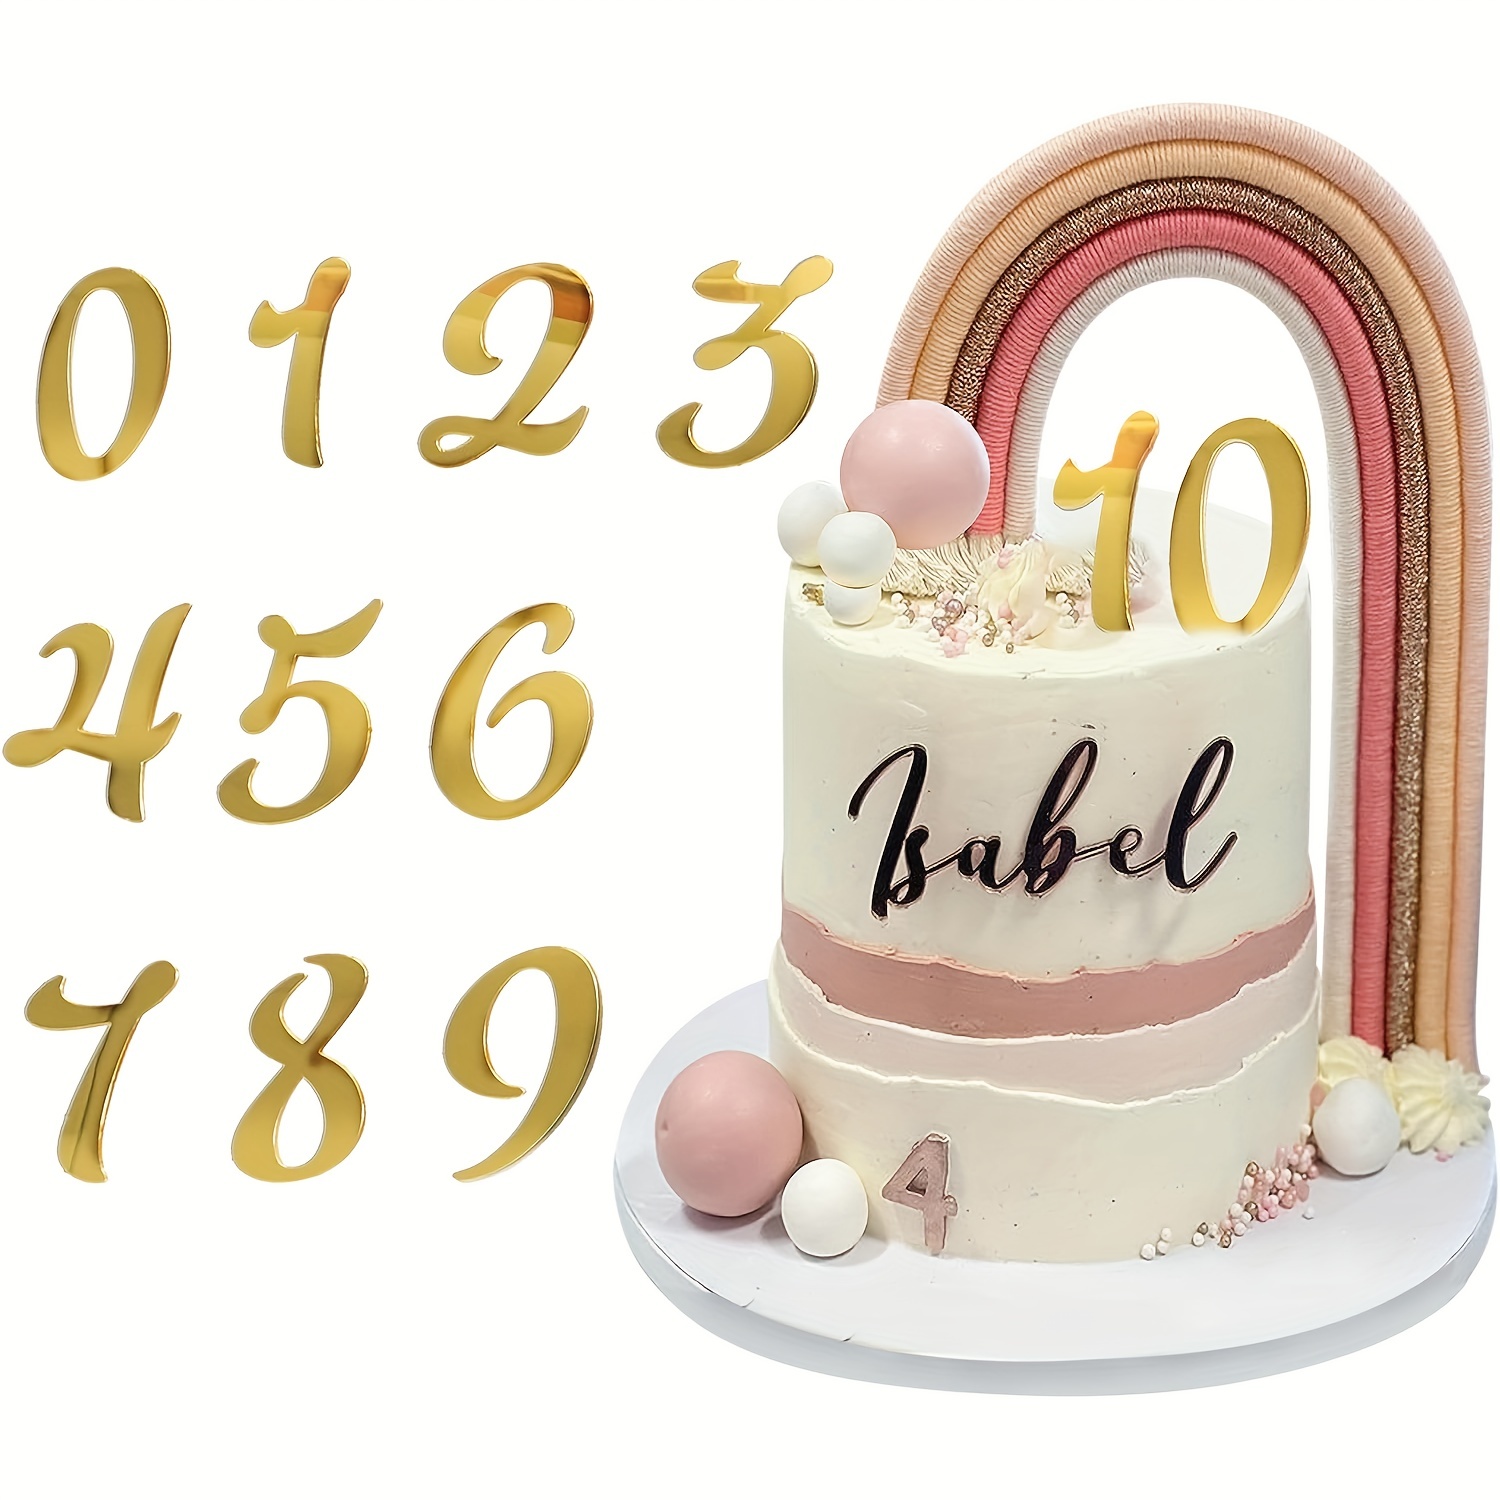 

Acrylic Number Cake Topper, Diy Cupcake Toppers With 0-9 Numbers Mirrored Golden Picks For Wedding Cake Decorations, Birthday Baby Shower Party Supplies